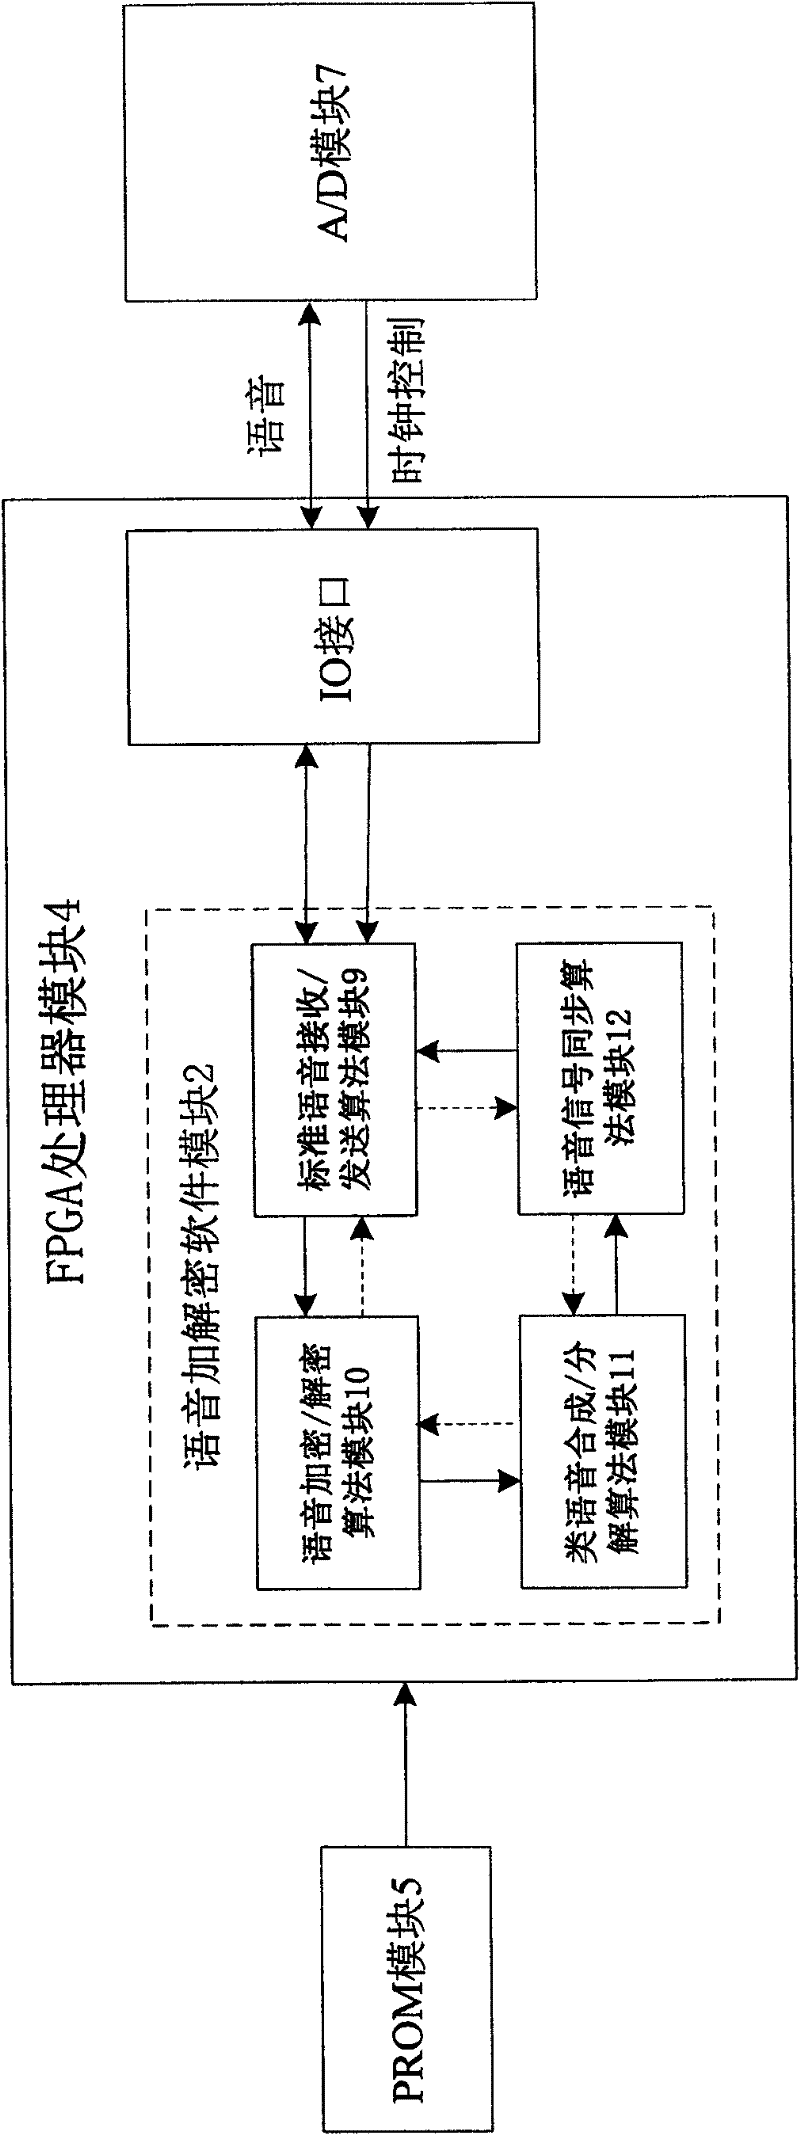 Anti-adaptive multi-rate coding third-generation mobile communication end-to-end voice encryption method